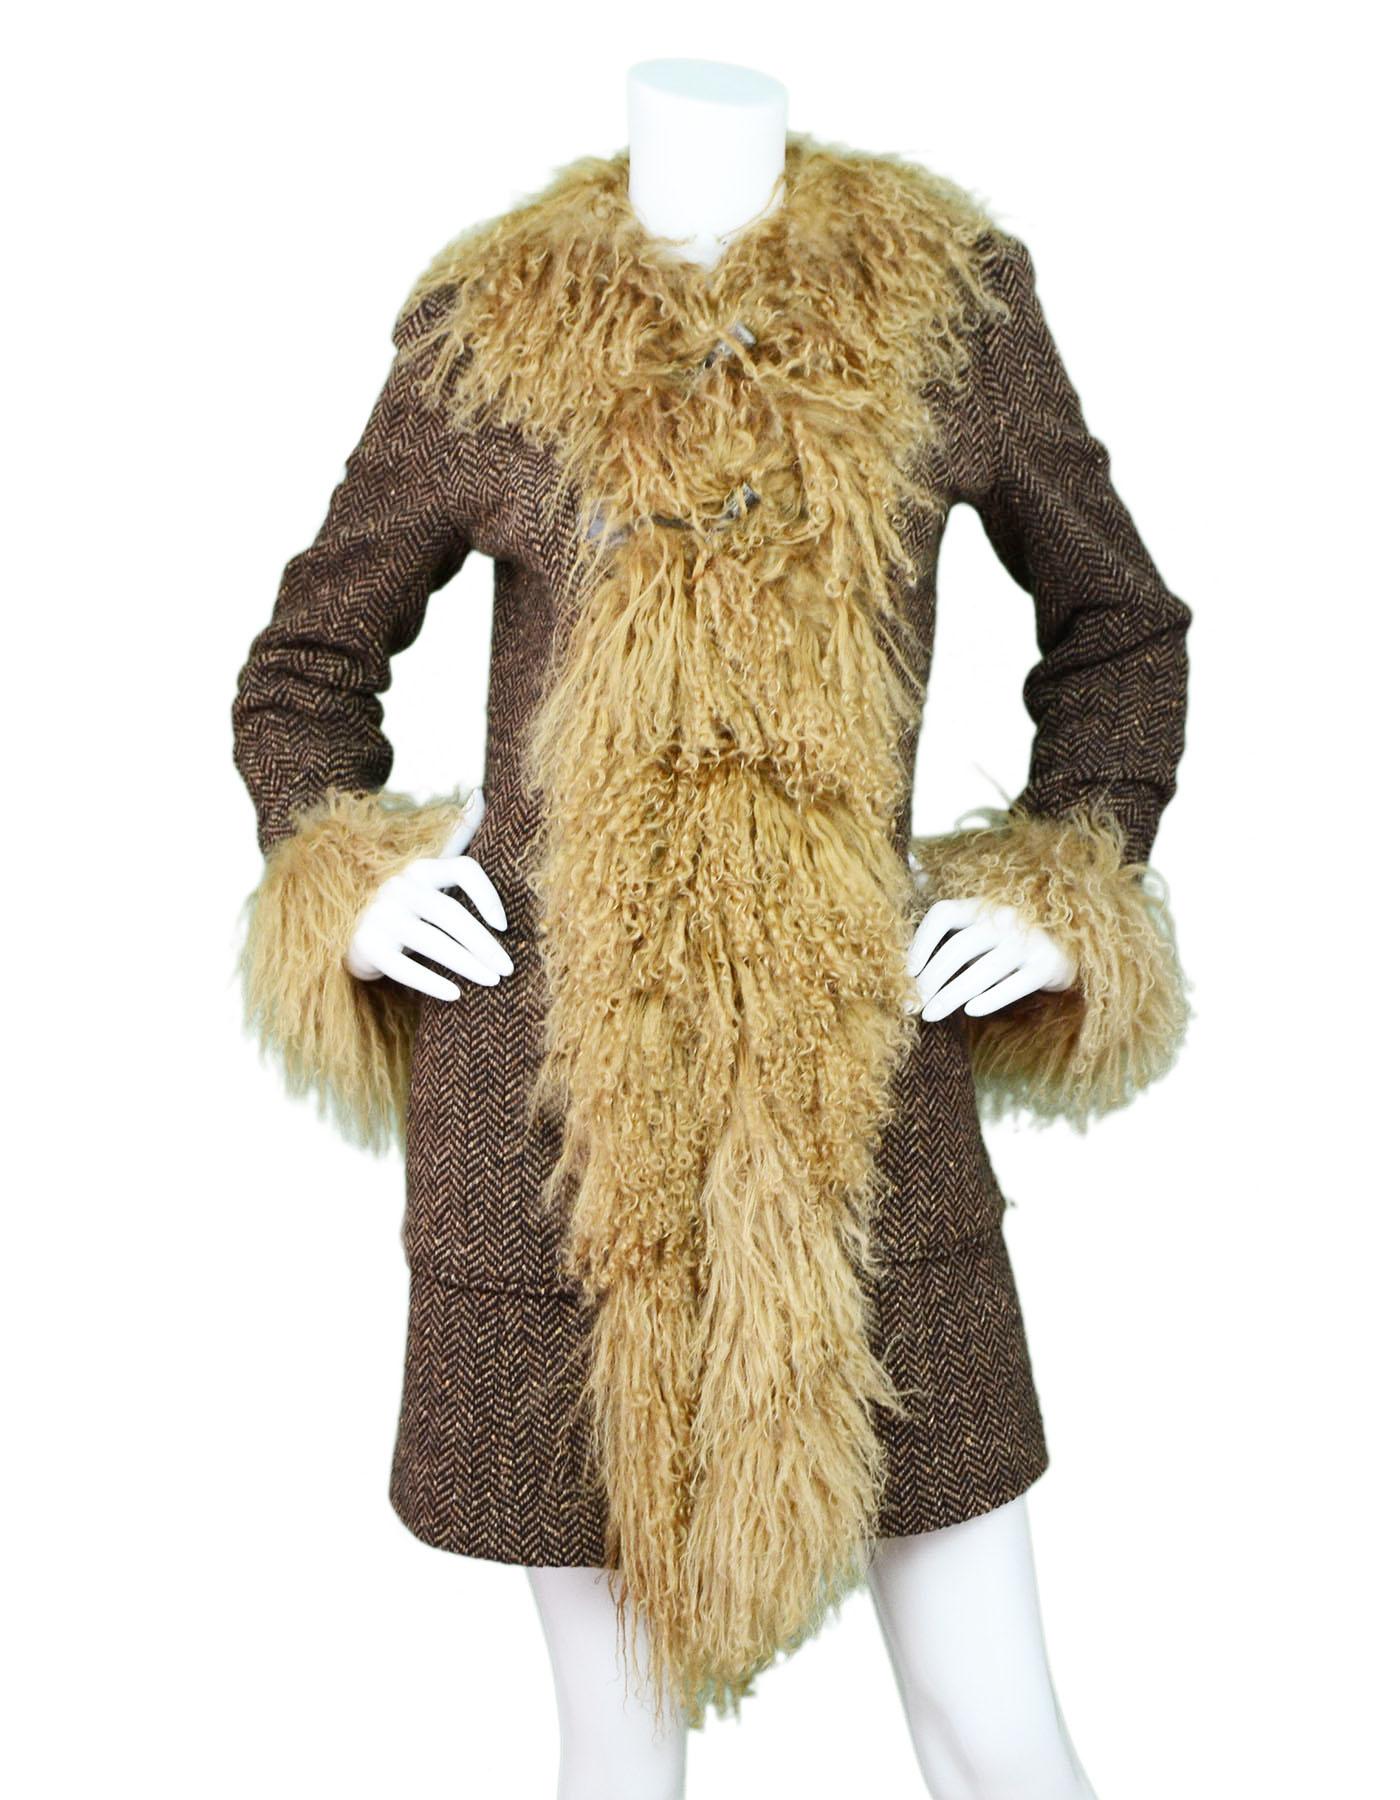 D&G Brown Wool Herringbone & Mongolian Fur Coat Sz IT40

Made In: Italy
Color: Brown
Composition: 90% wool, 10% nylon
Lining: Brown print textile
Closure/Opening: Front toggle closure
Exterior Pockets: Patch pockets at hips
Overall Condition: